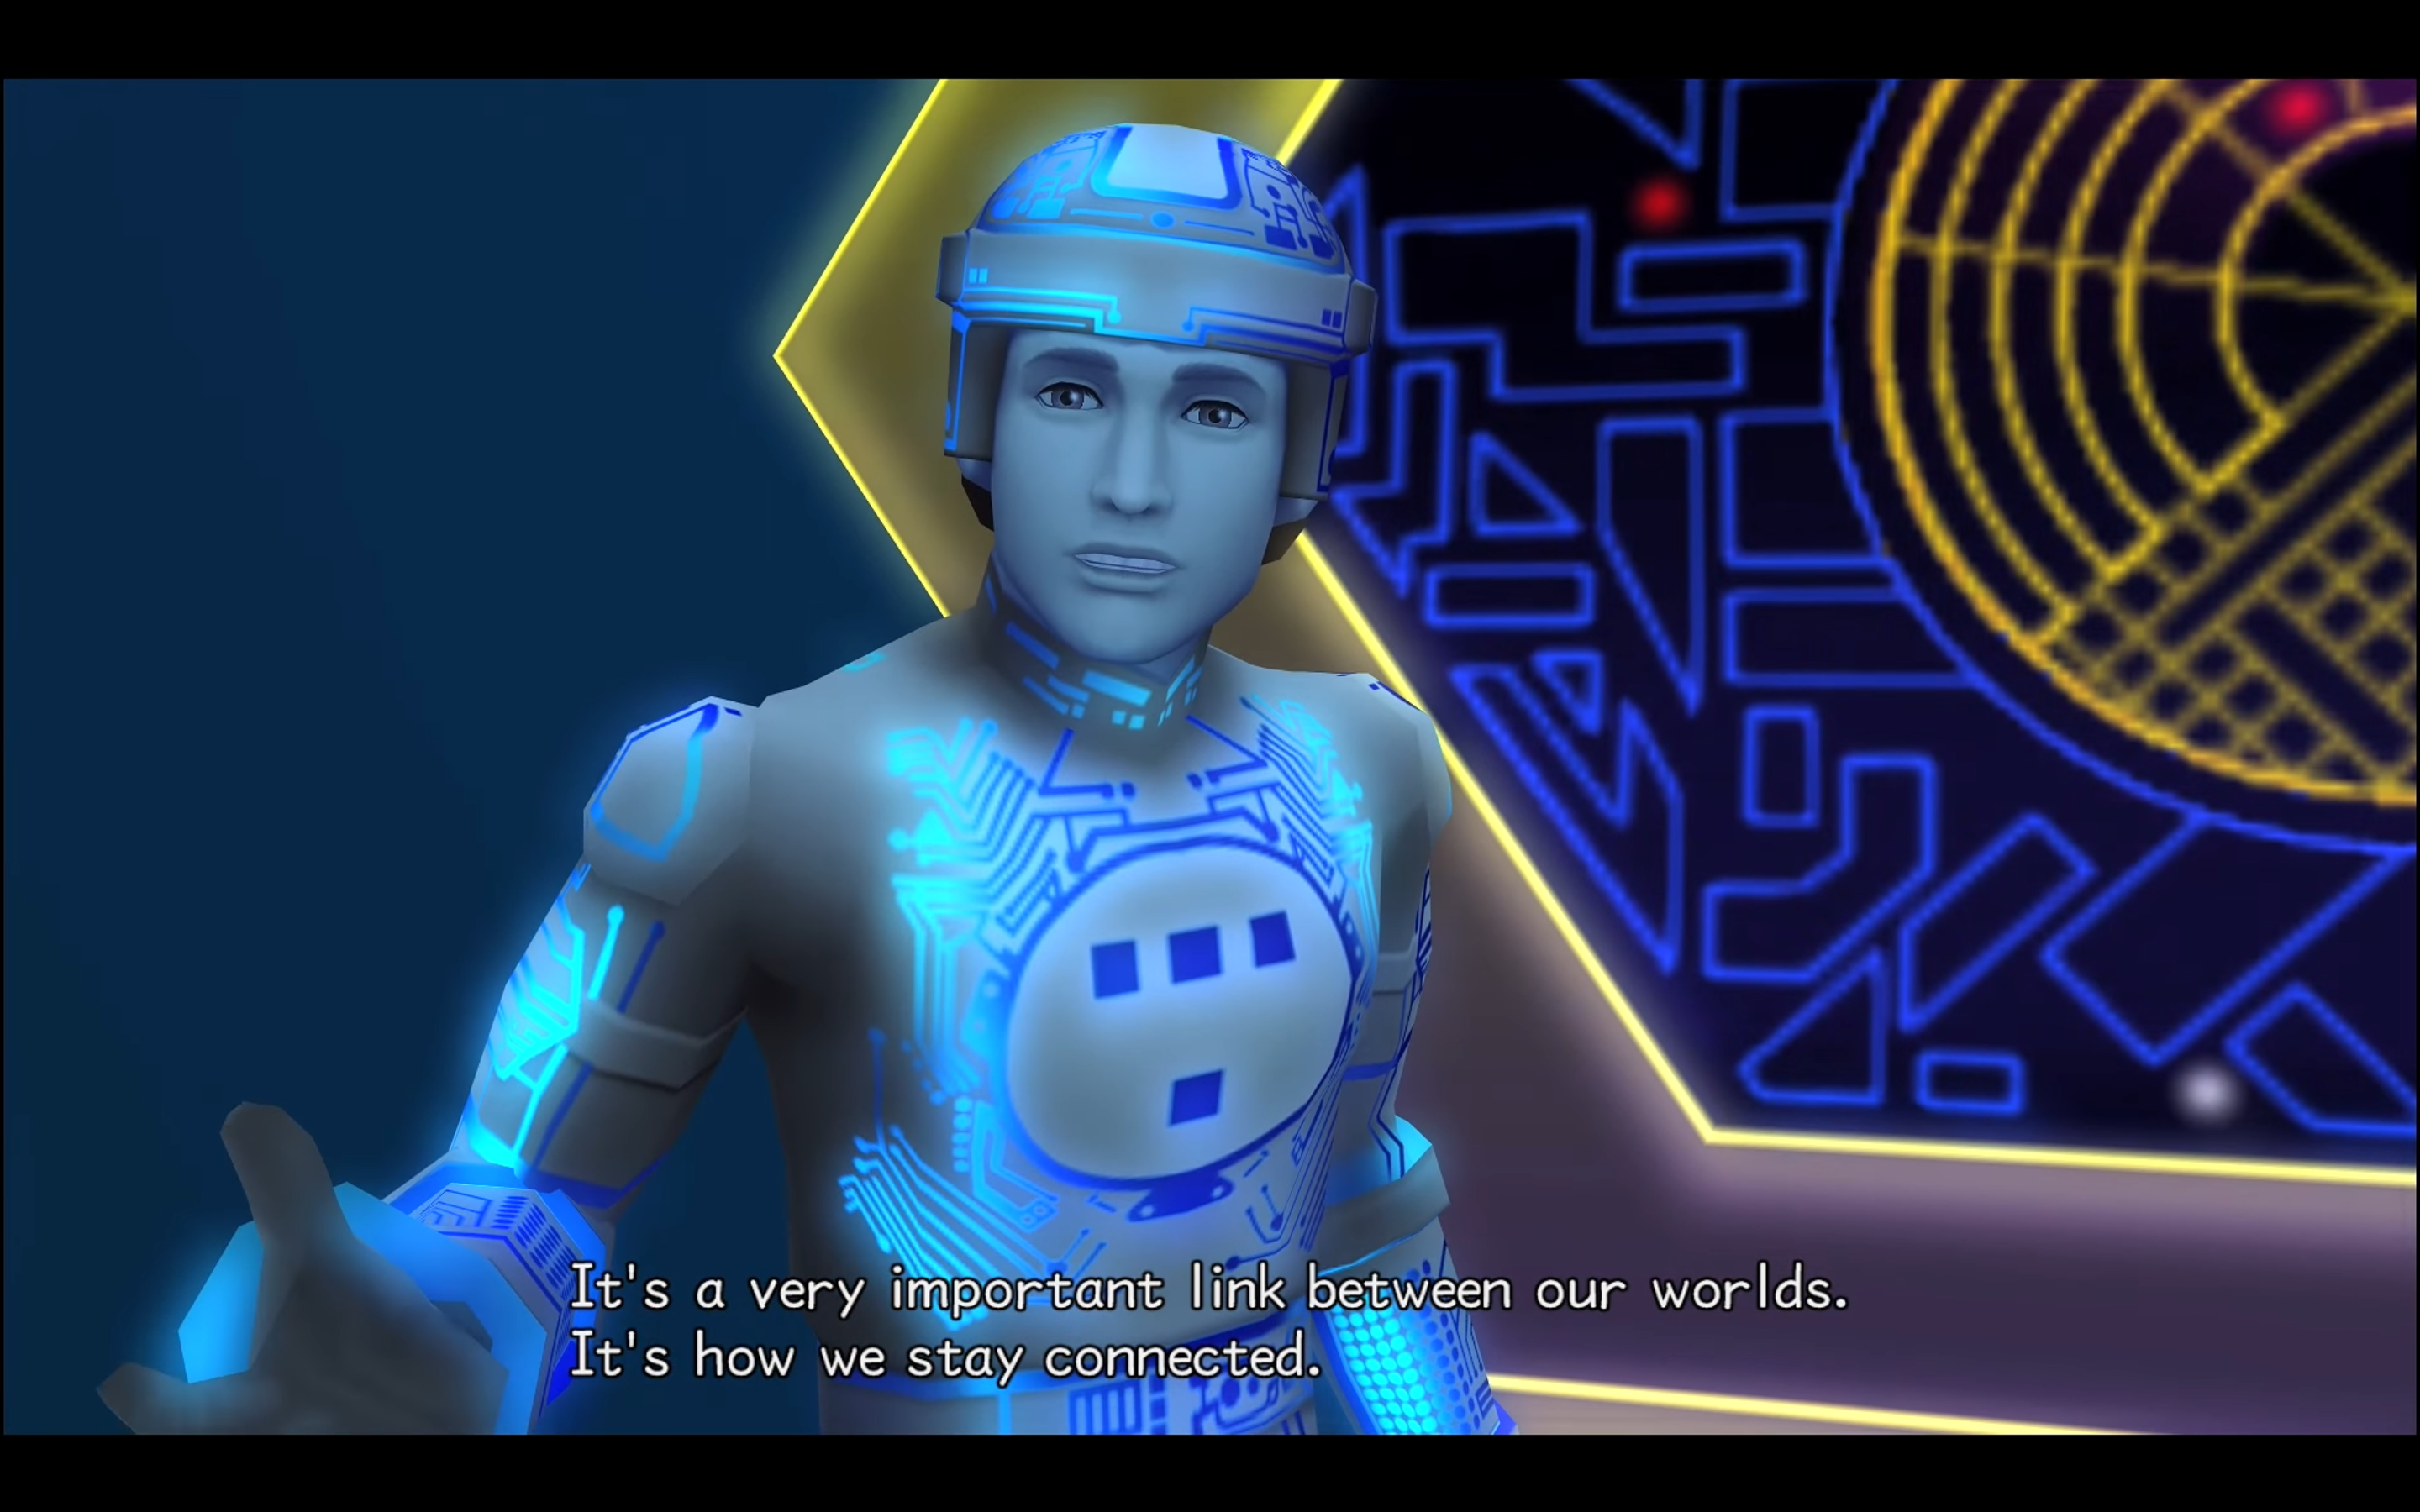 "Kingdom Hearts II." Square Enix. 2007.
Tron explains the link between his world and Hollow Bastion.